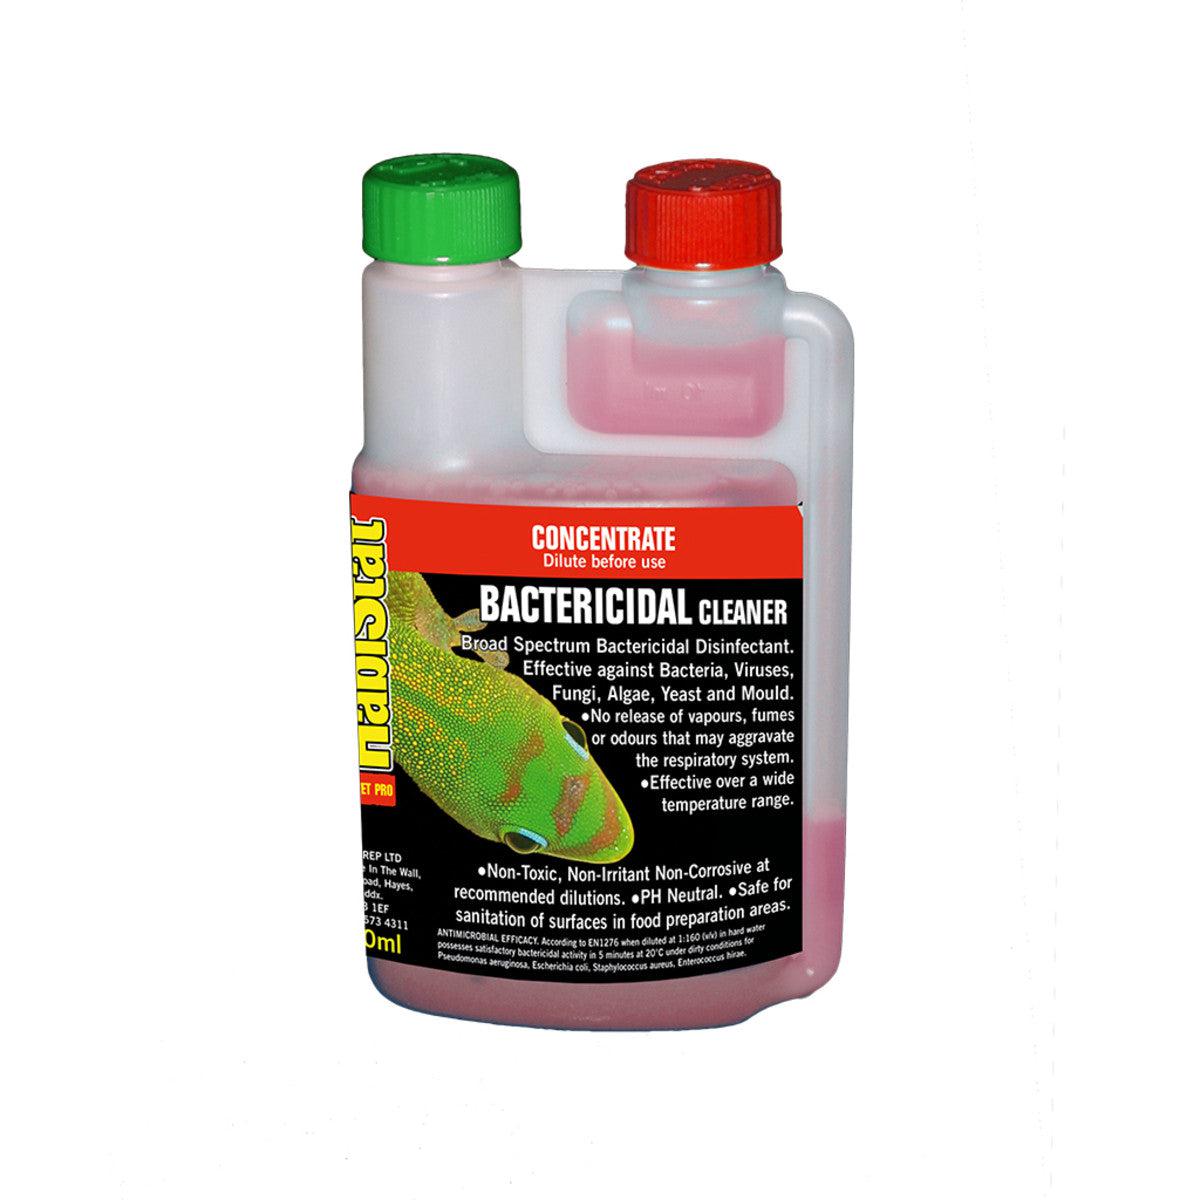 HabiStat Bactericidal Cleaner, Concentrate